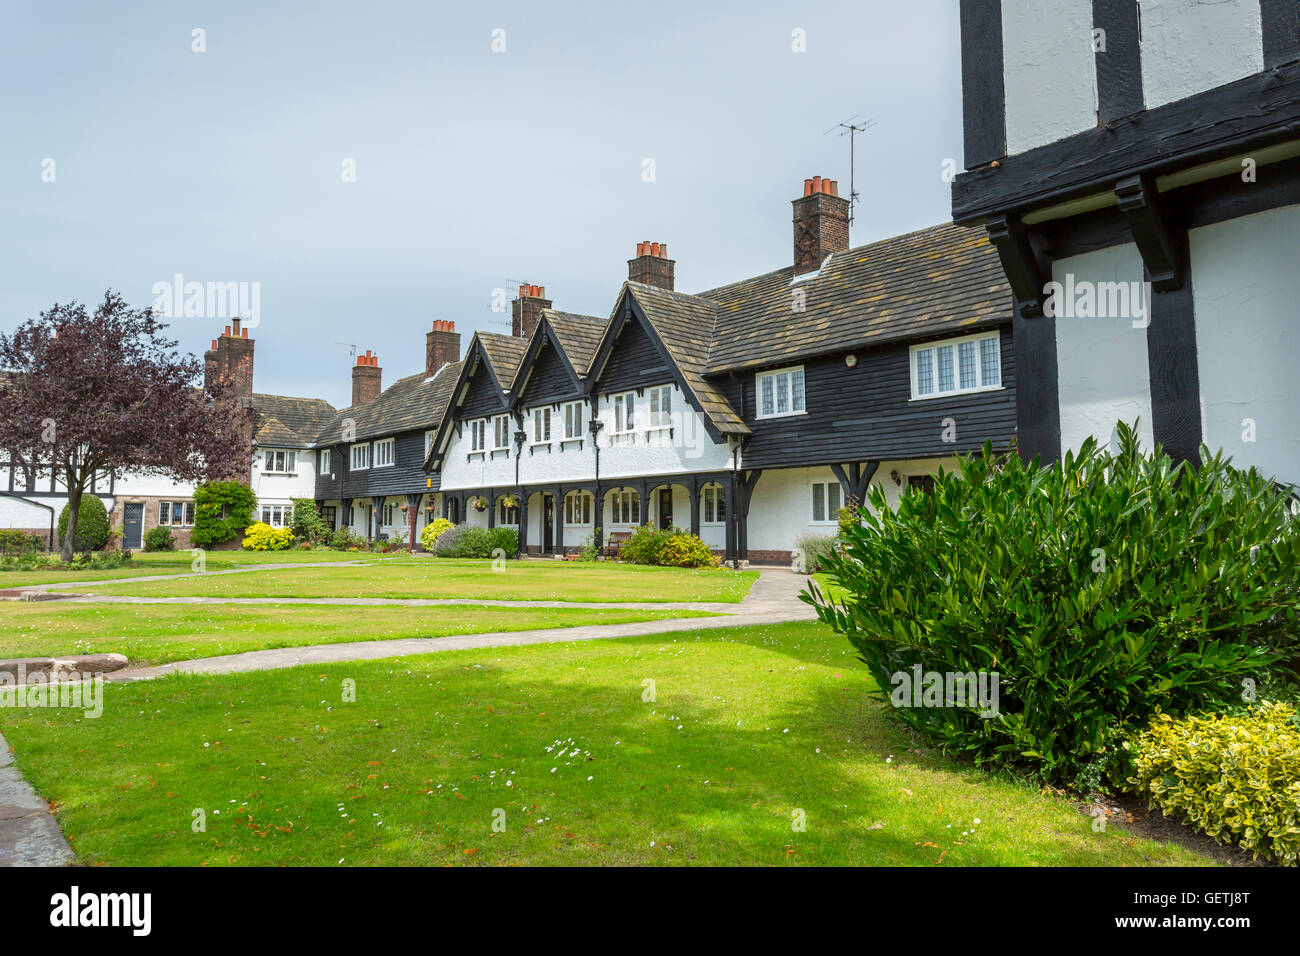 Attractive housing provided at Port Sunlight by William Lever. Stock Photo